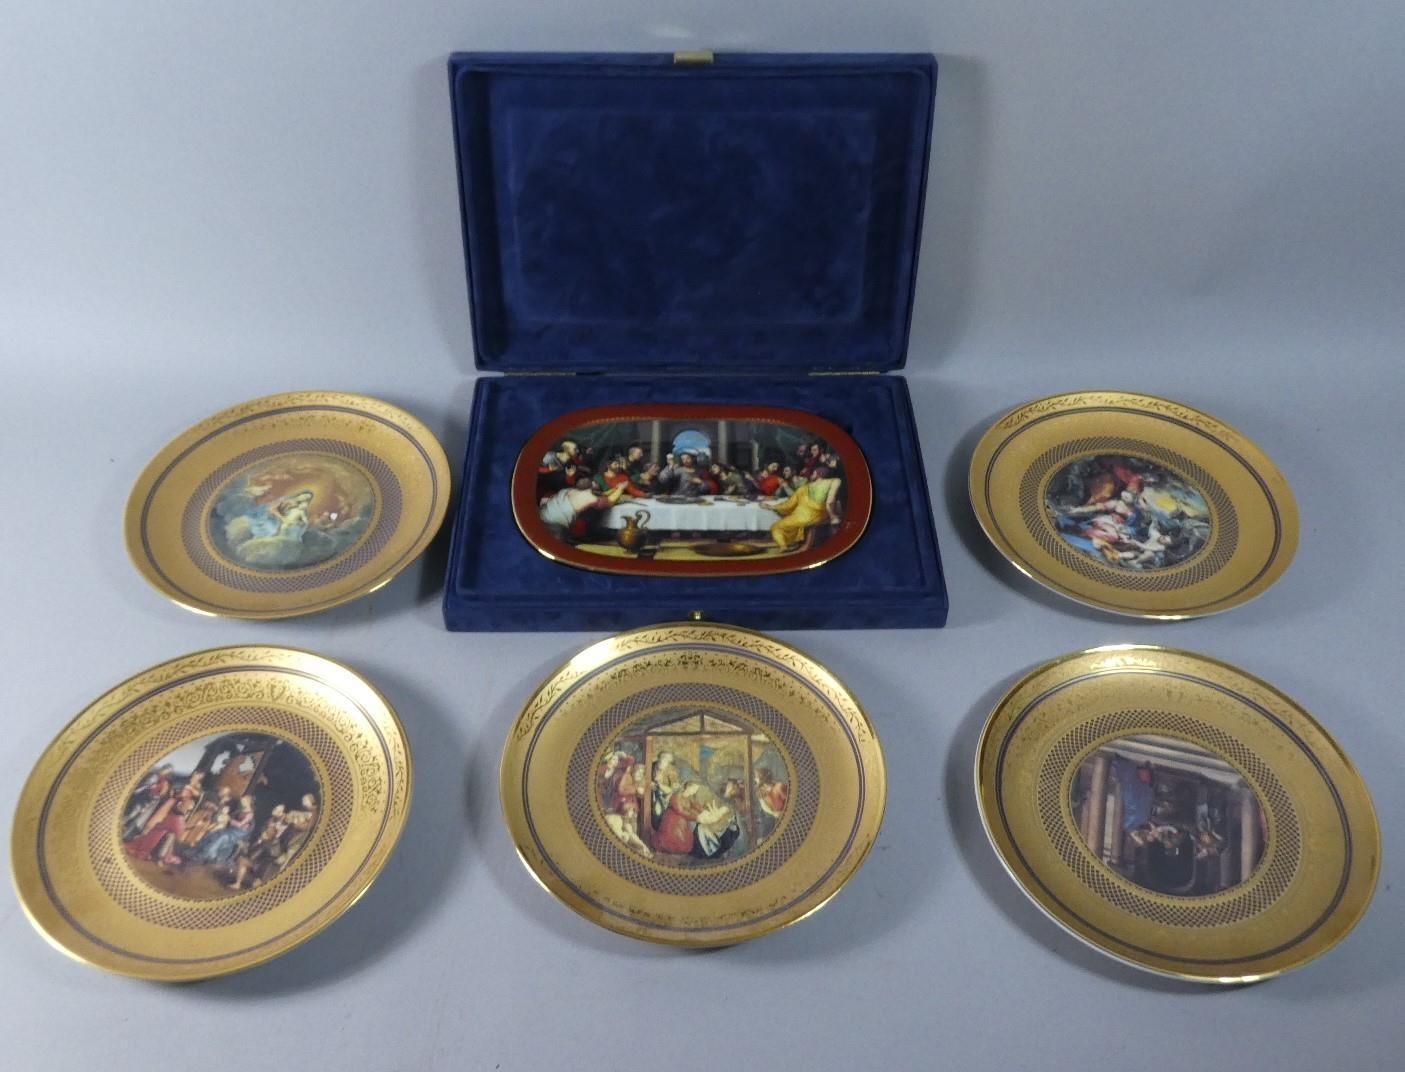 A Collection of Five Franklin Mint 'The History of Christ in Art' Porcelain Plates, Hand Numbered